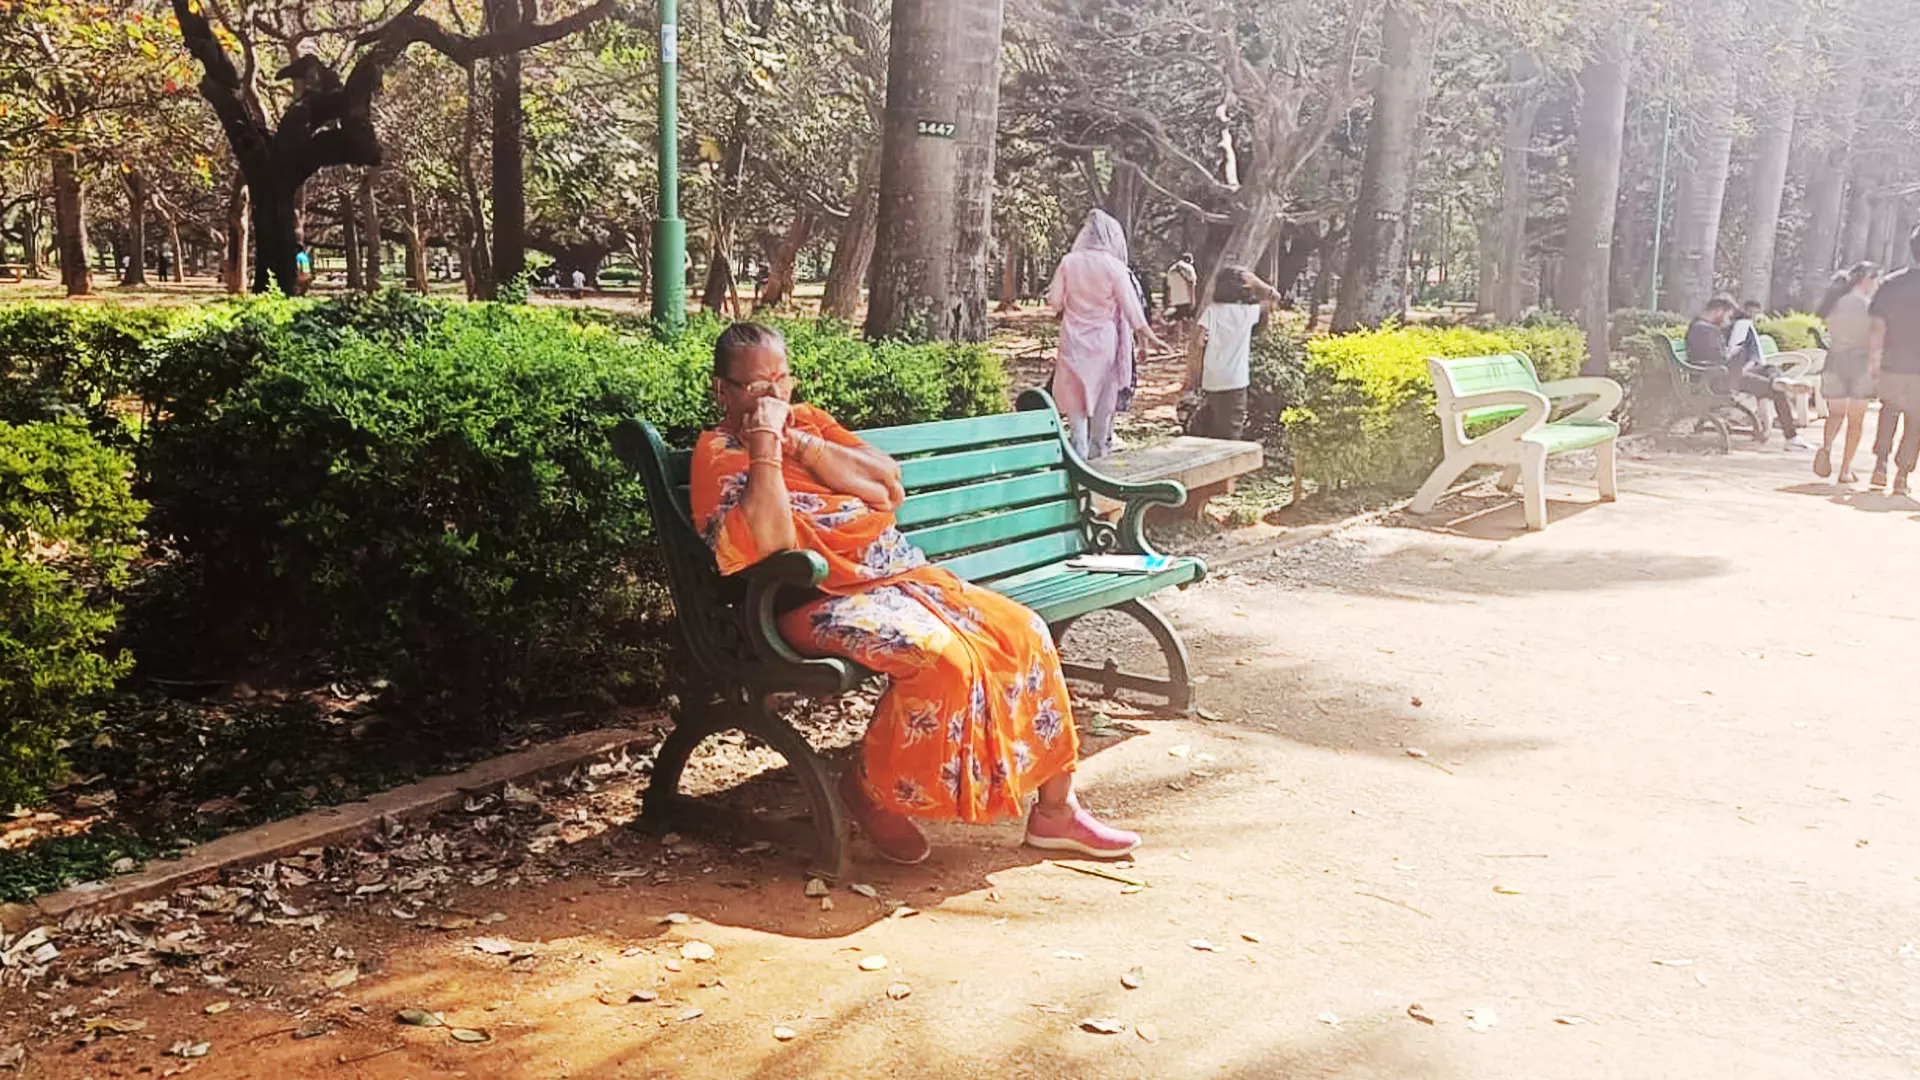 Gauriamma P, 64, said that she tries to visit the park as often as possible. Photos: Maitreyee Boruah